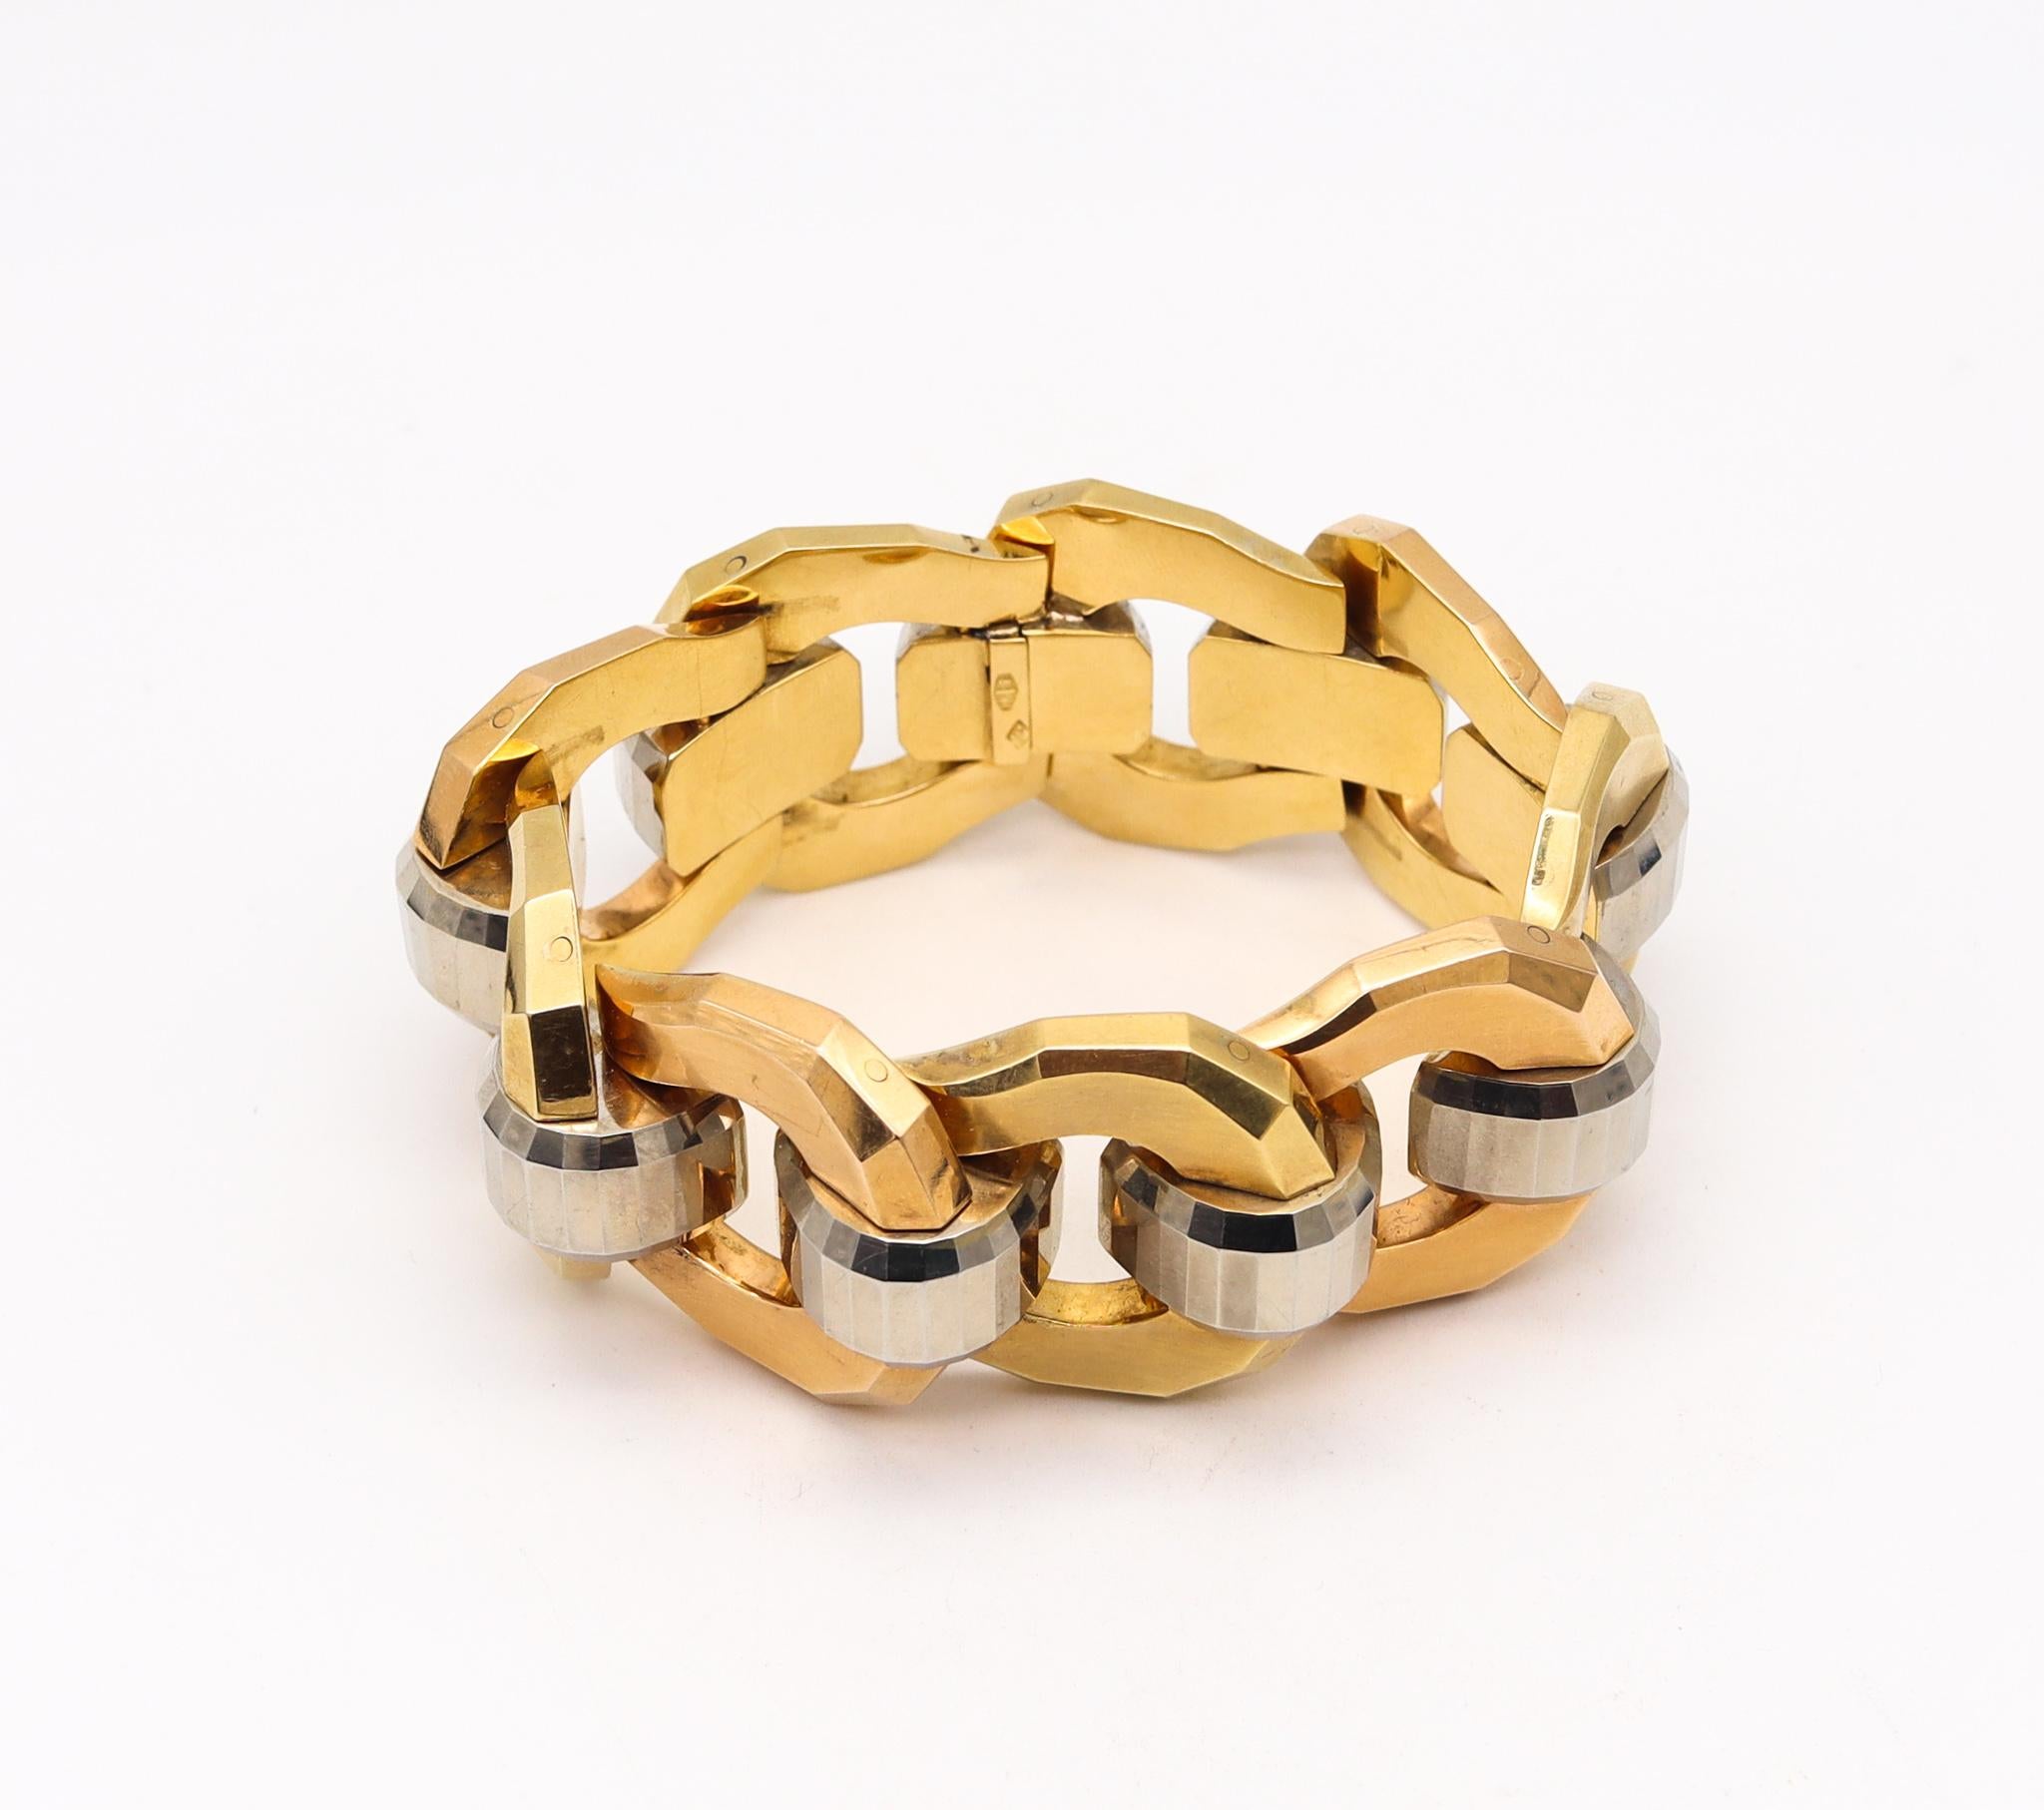 Italy, 1930, Art Deco Rare Bold Tank Bracelet in Two Tones of Faceted 18Kt Gold 1